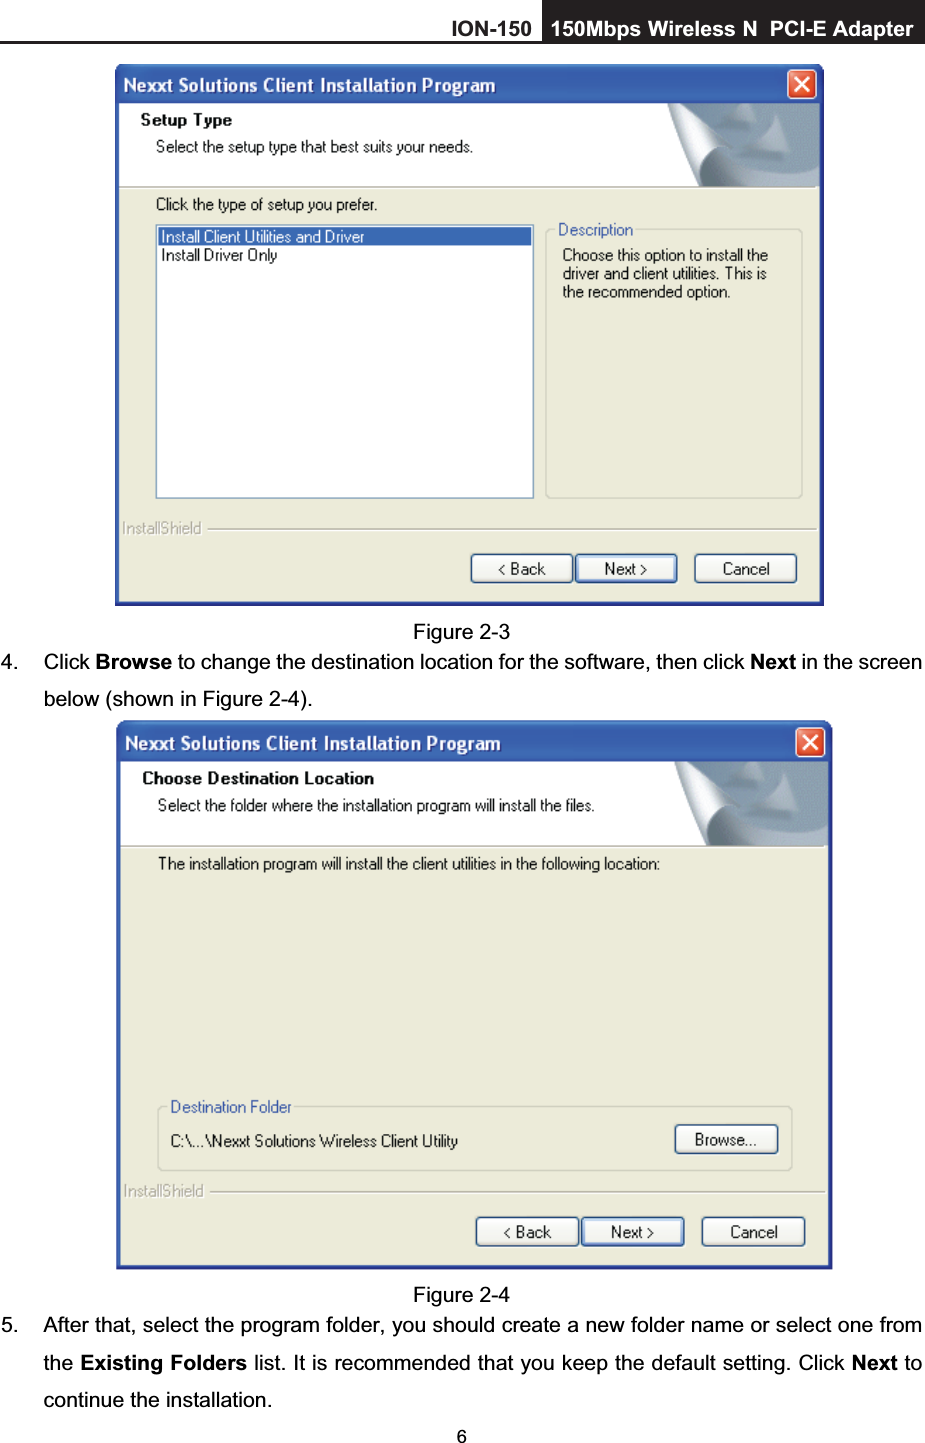 6Figure 2-3 4. Click Browse to change the destination location for the software, then click Next in the screen below (shown in Figure 2-4).Figure 2-4 5.  After that, select the program folder, you should create a new folder name or select one from the Existing Folders list. It is recommended that you keep the default setting. Click Next to continue the installation. ION-150 150Mbps         Wireless         N  PCI-E Adapter